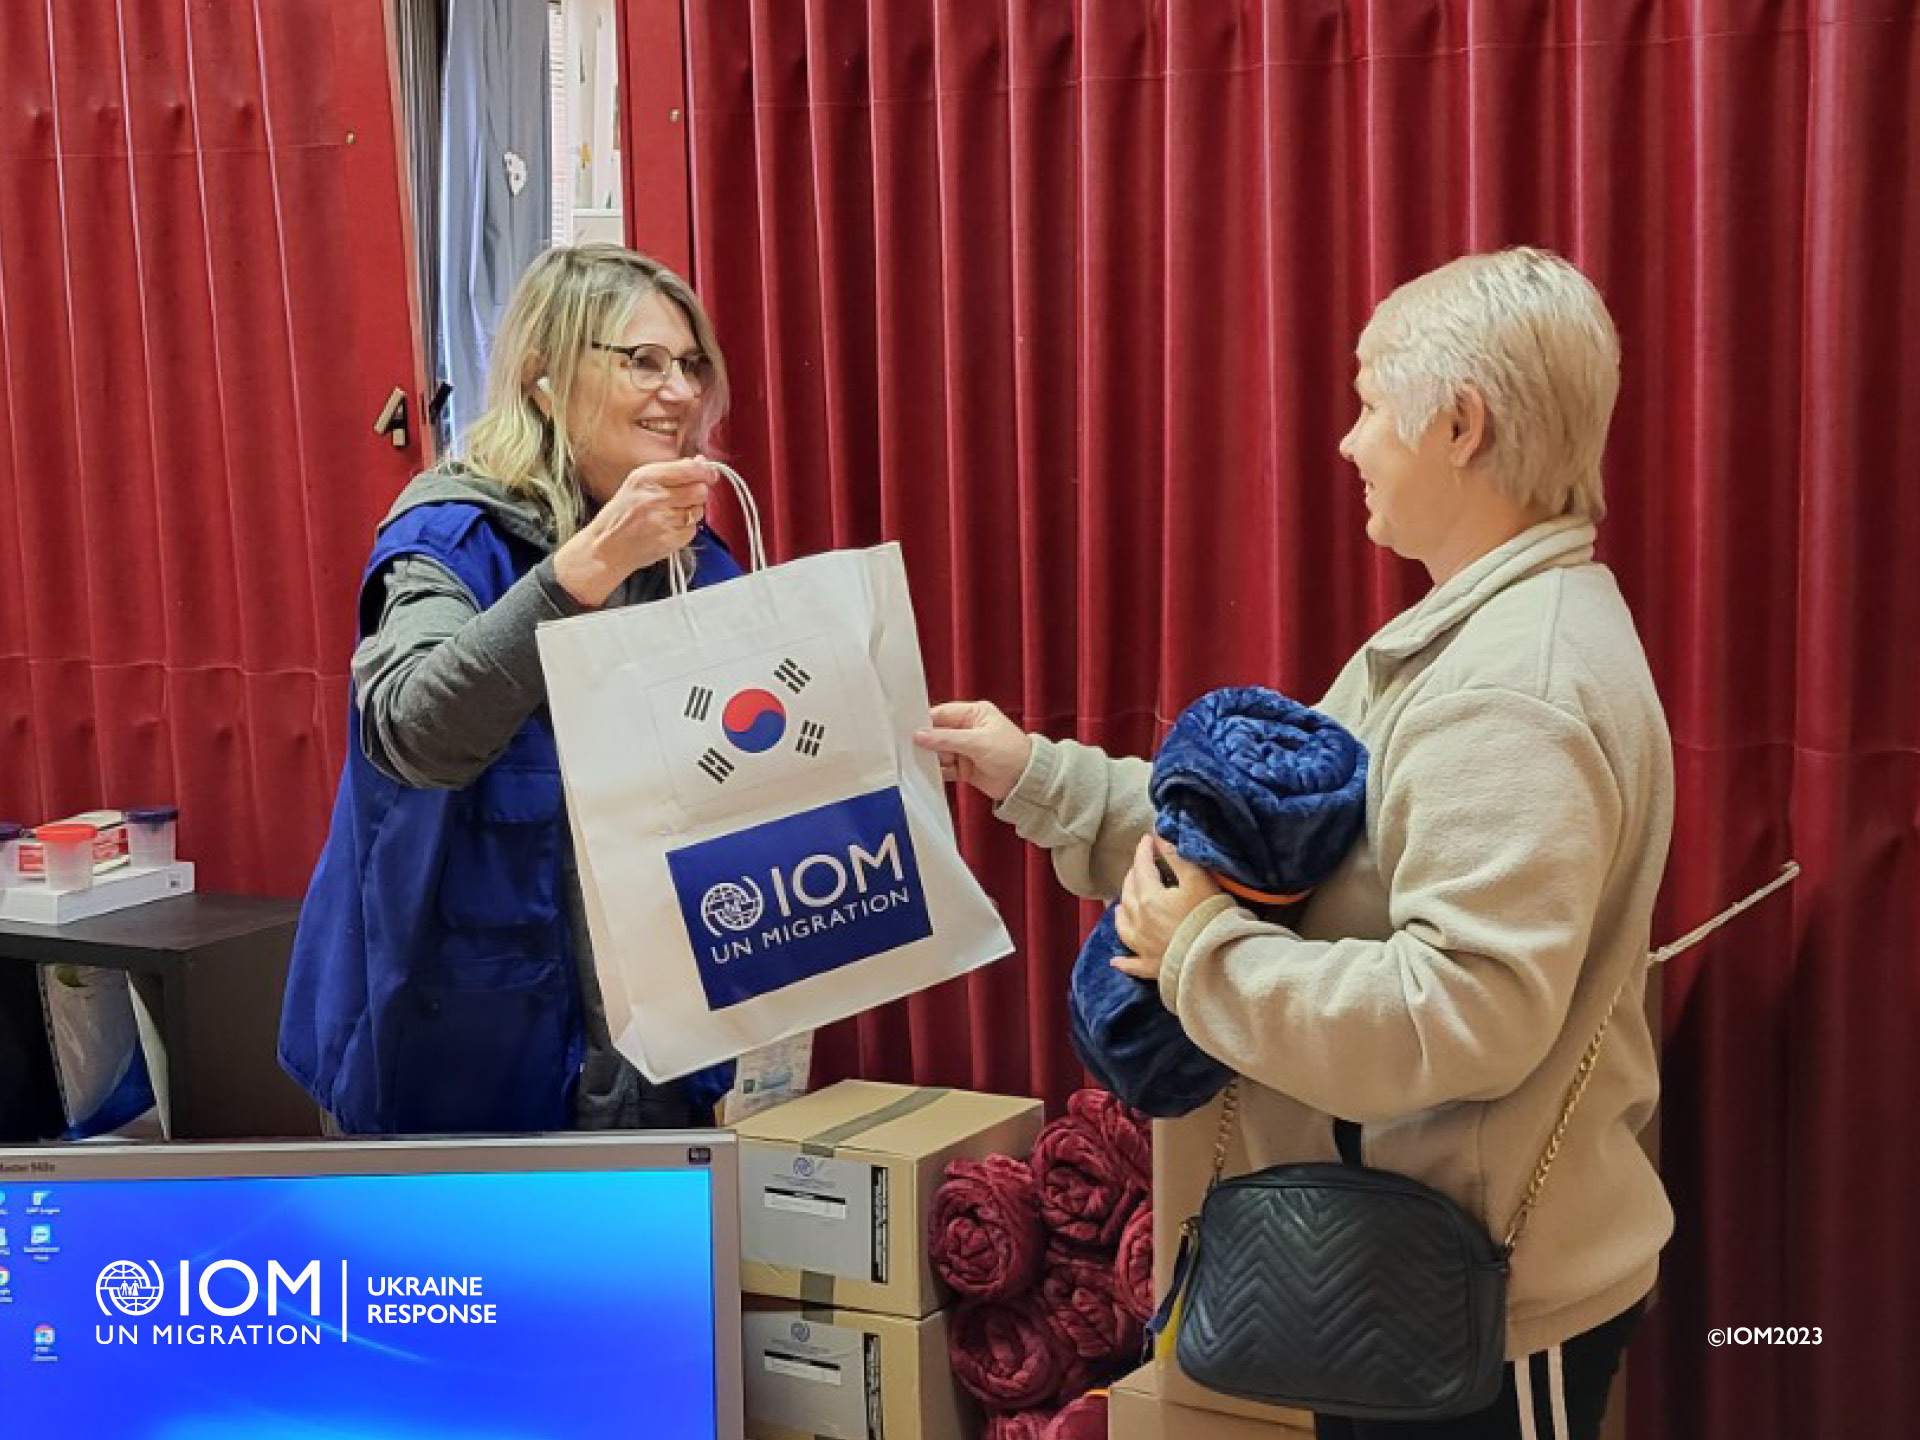 Aid deliver in the humanitarian centre in Gabcikovo. Blankets are part of IOM clothing aid that helps people in need to face winter conditions. Photo © International Organization for Migration (IOM) 2023.